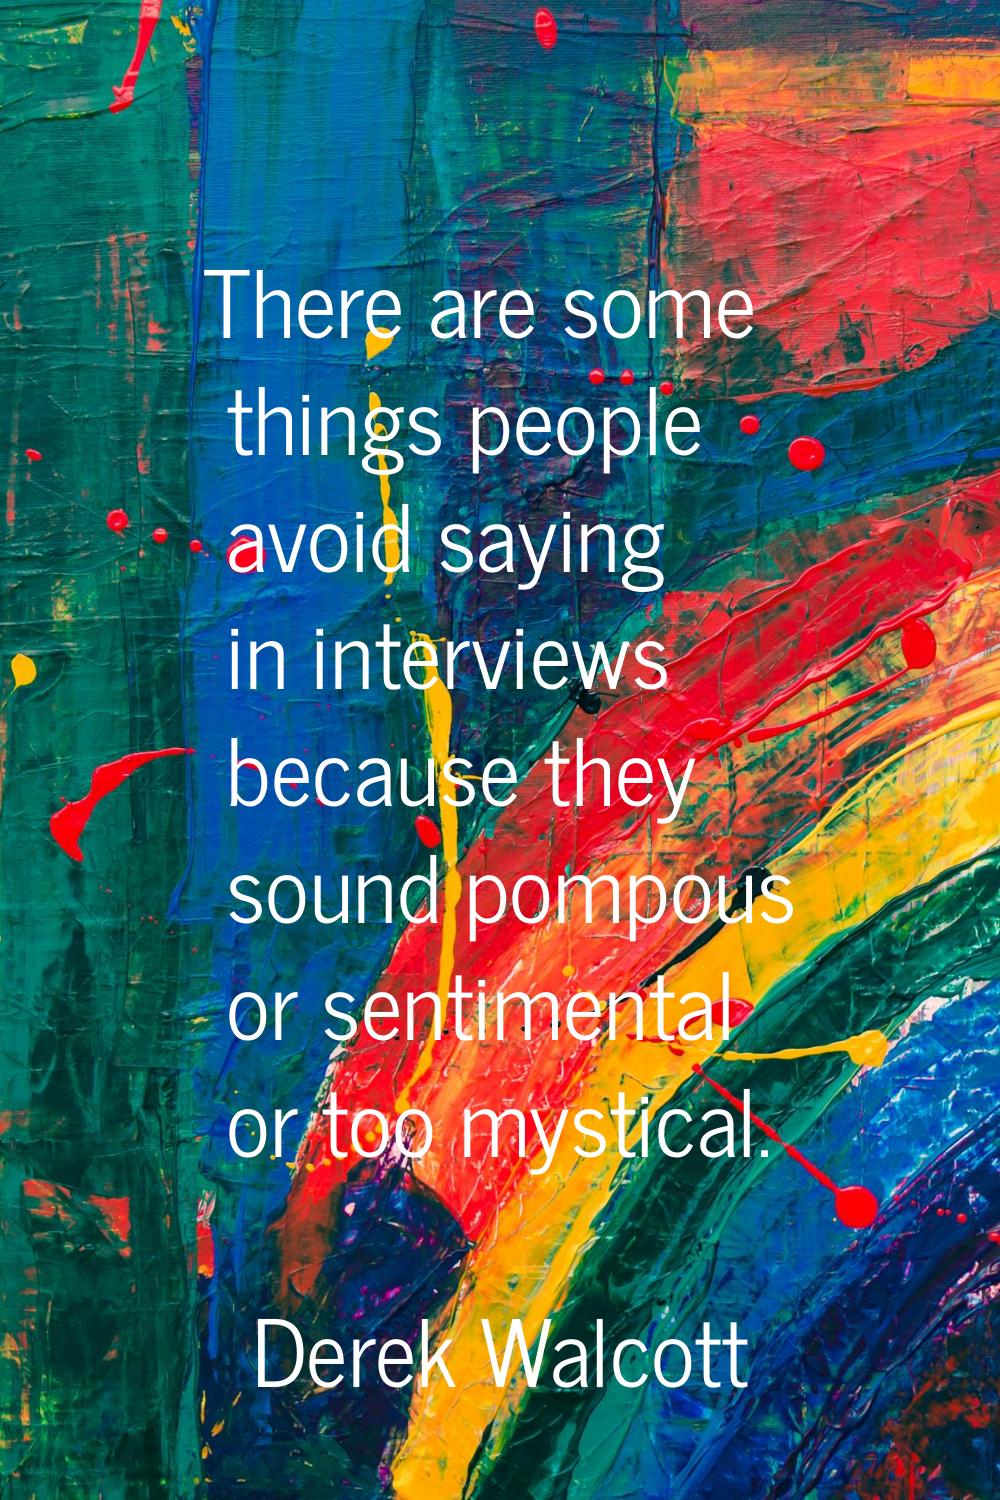 There are some things people avoid saying in interviews because they sound pompous or sentimental o